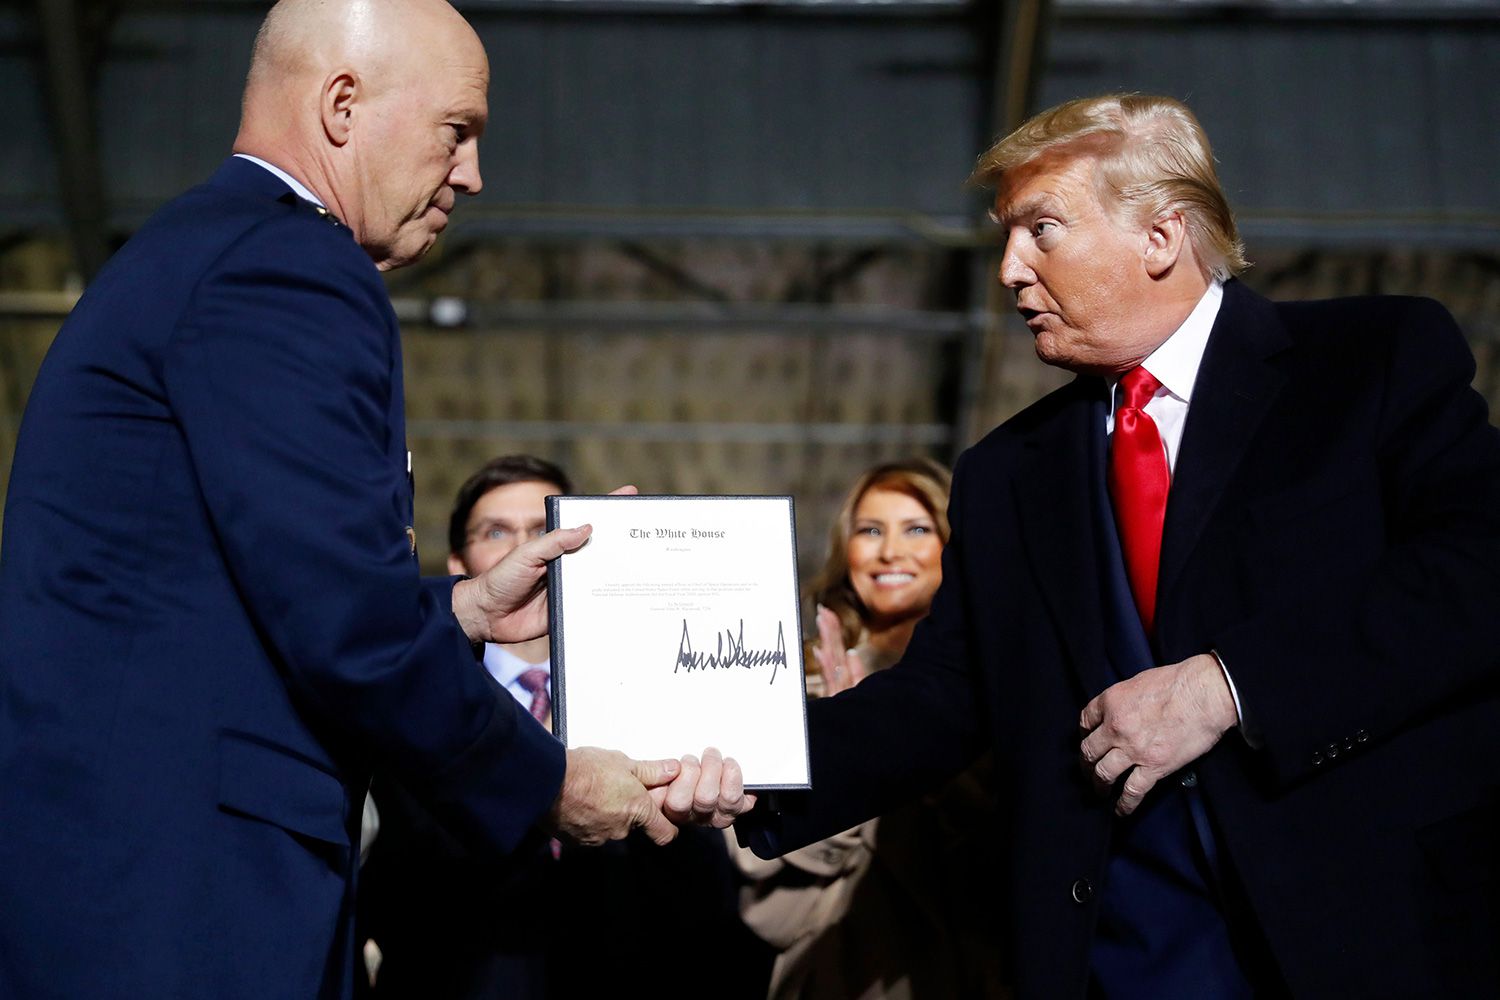 President Donald Trump shakes hands with Gen. Jay Raymond, after signing the letter of his appointment as the chief of space operations for U.S. Space Command during a signing ceremony for the National Defense Authorization Act for Fiscal Year 2020 at Andrews Air Force Base, Md Trump, Andrews Air Force Base, USA - 20 Dec 2019